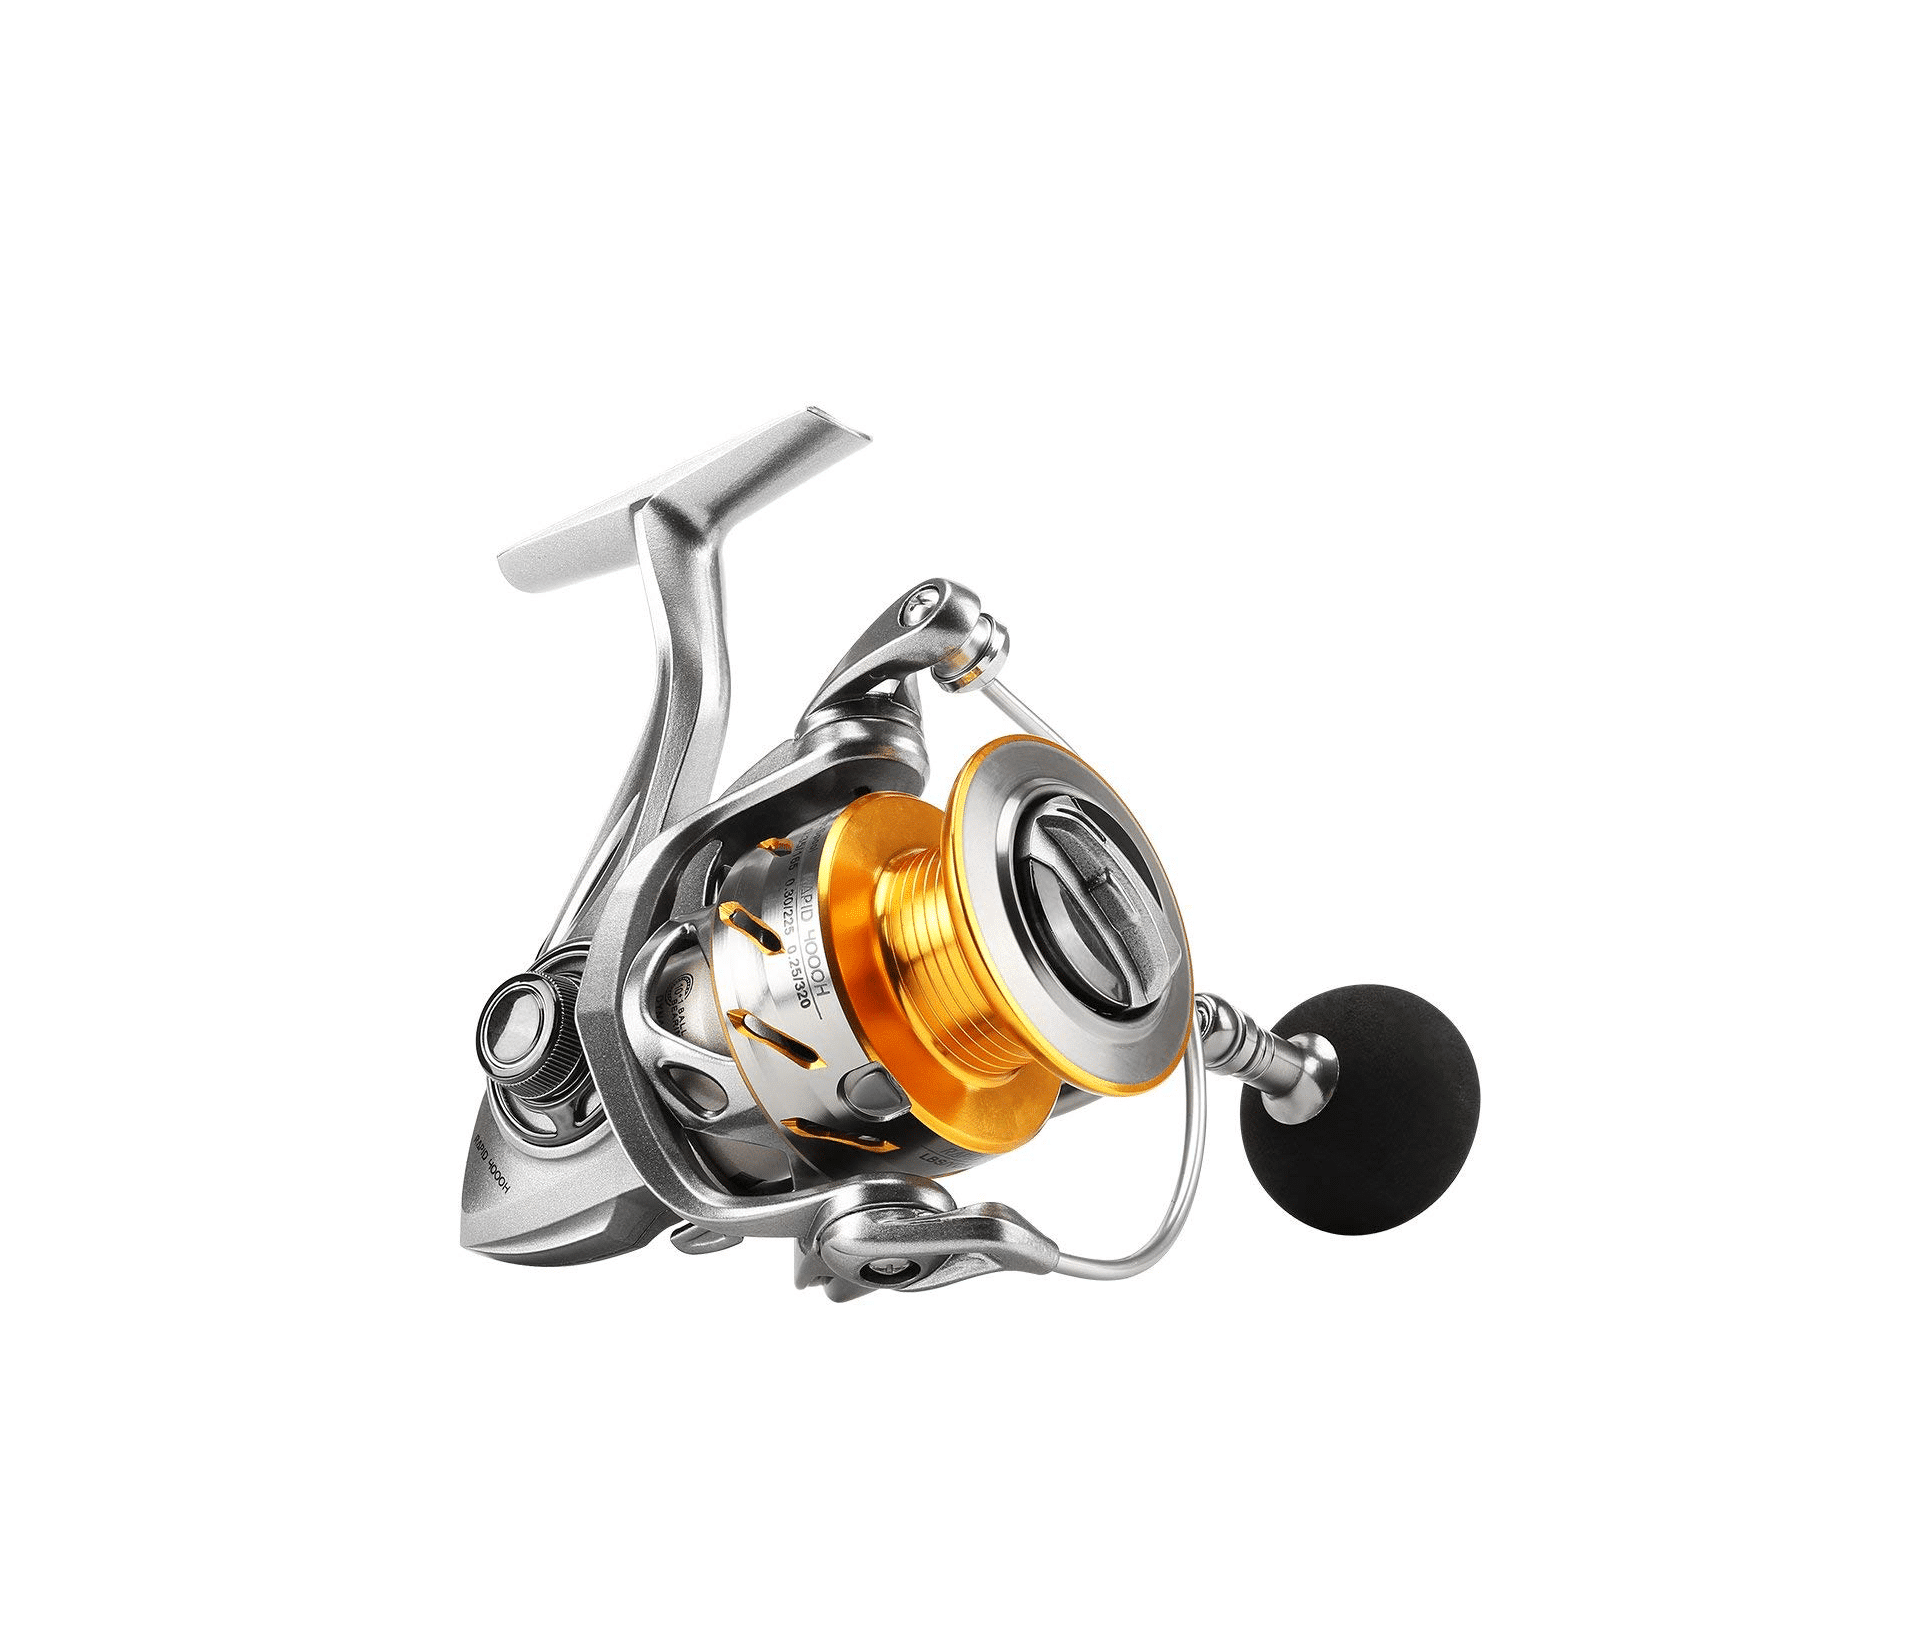 SeaKnight Rapid Saltwater Spinning Reel 2019 [Updated] Review